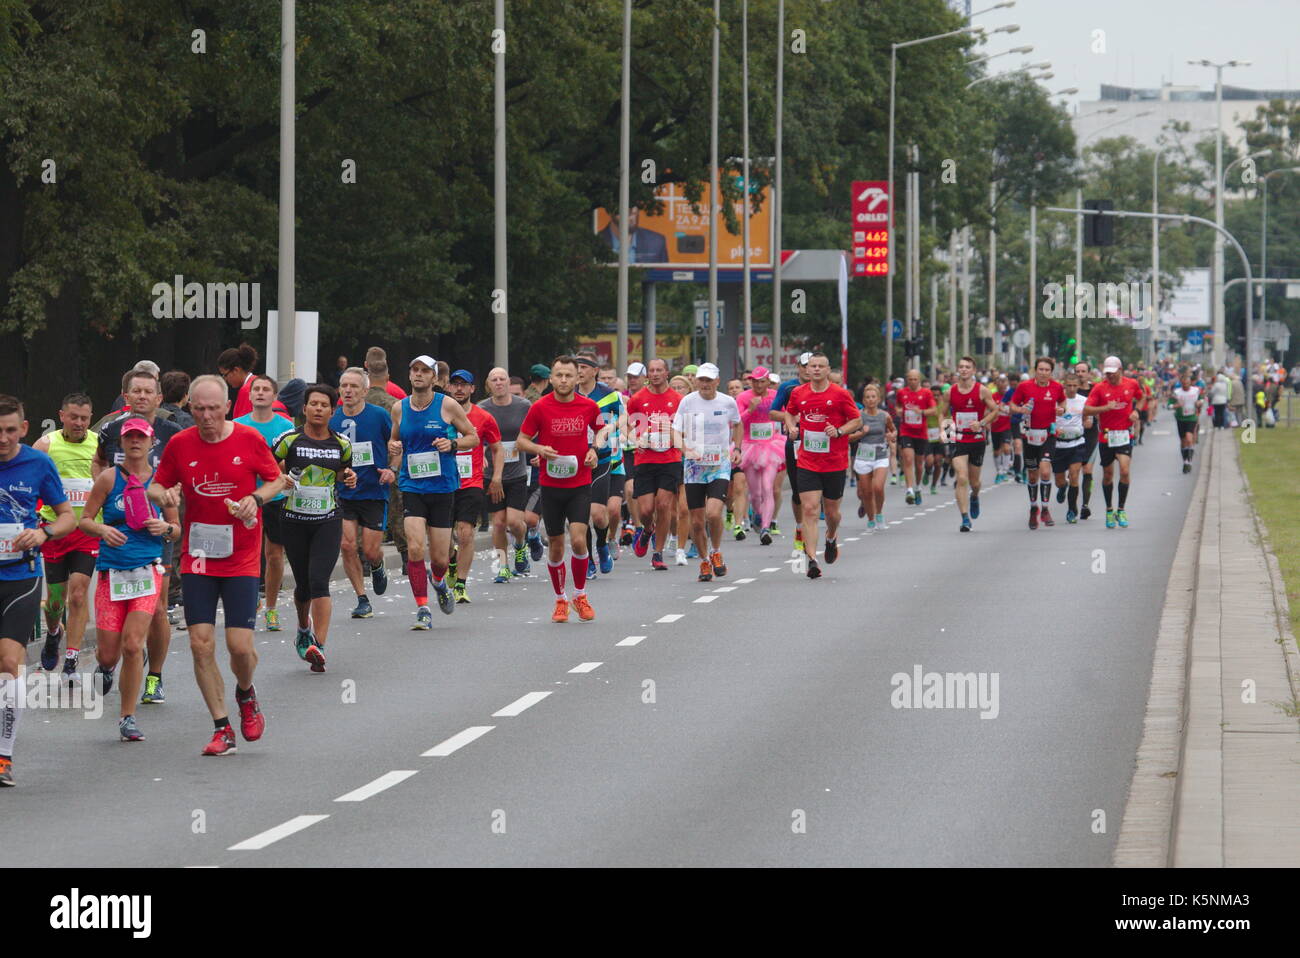 Wroclaw, Poland, 10 Sep, 2017. Runners from Poland and abroad participate in marathon. Lotnicza street - just beyond the half-way point. Credit: Borys Szefczyk/Alamy Live News Stock Photo